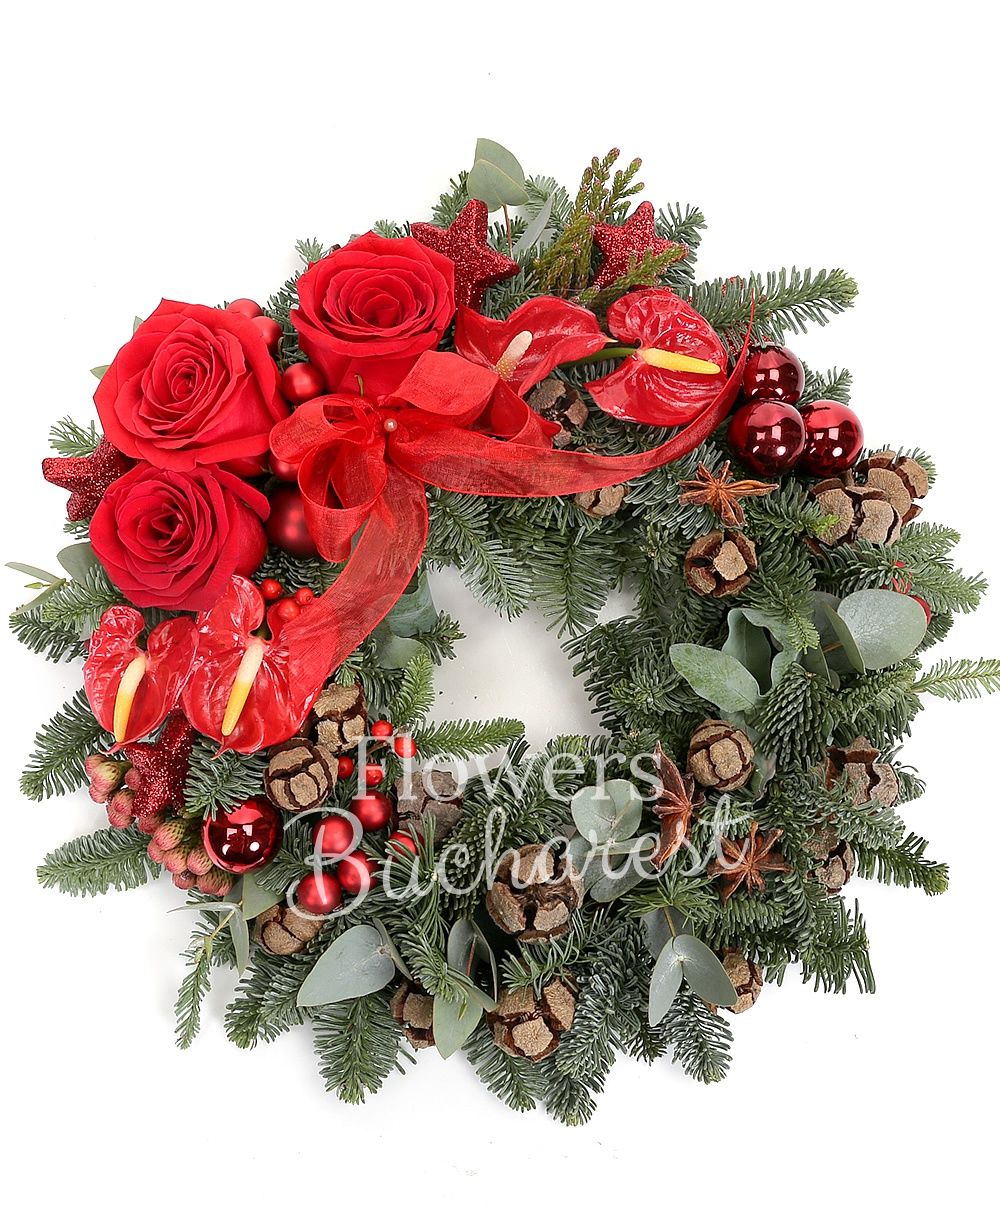 3 red roses, 4 anthurium, brunia, greenery, silver fir, christmas decorations